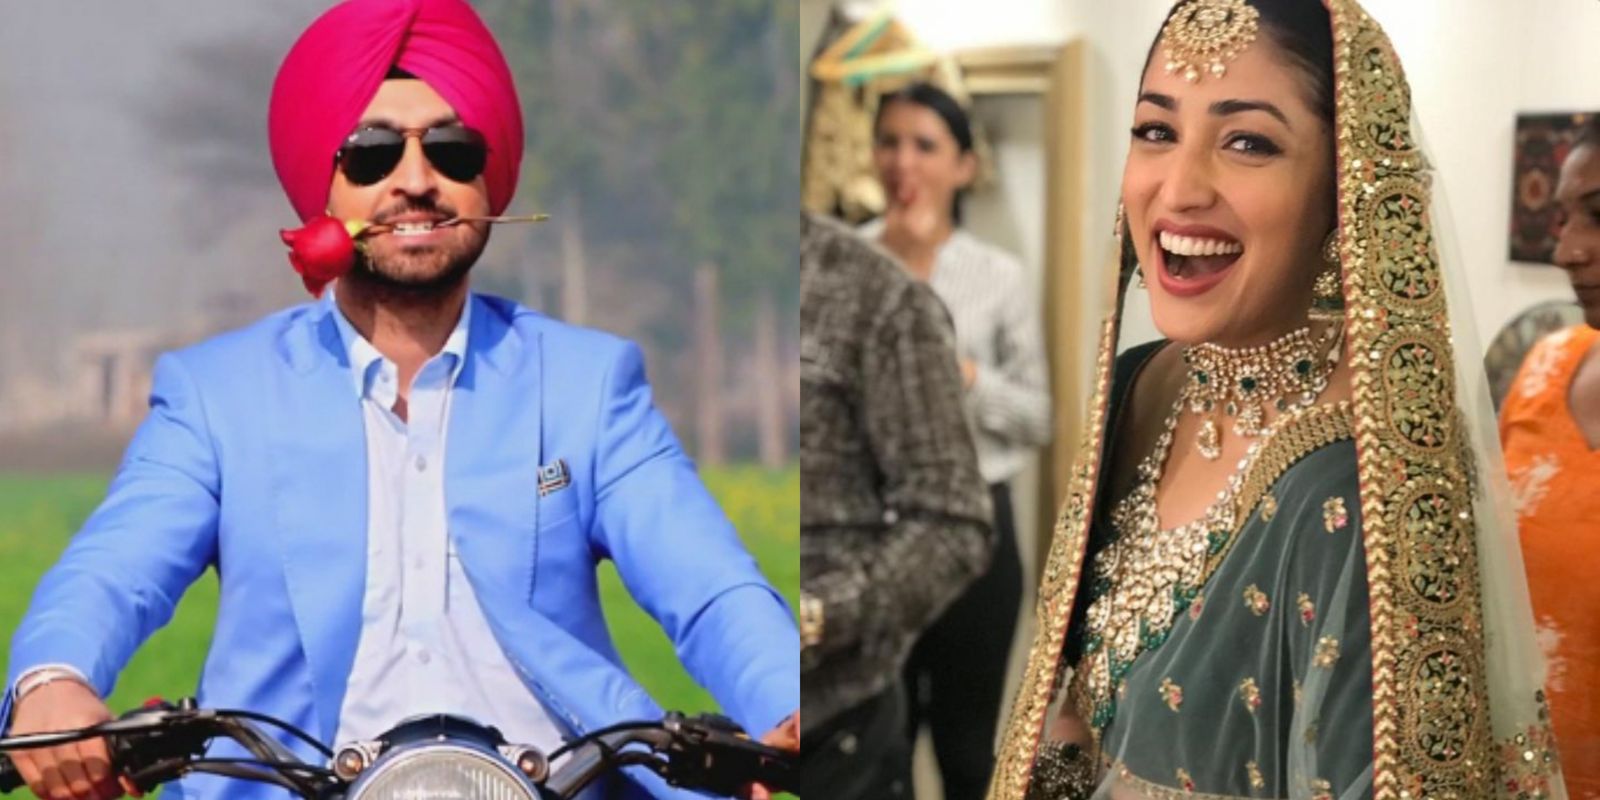 Yami Gautam To Share The Screen With Diljit Dosanjh In Shaad Ali’s Upcoming Film Based On Male Pregnancy?